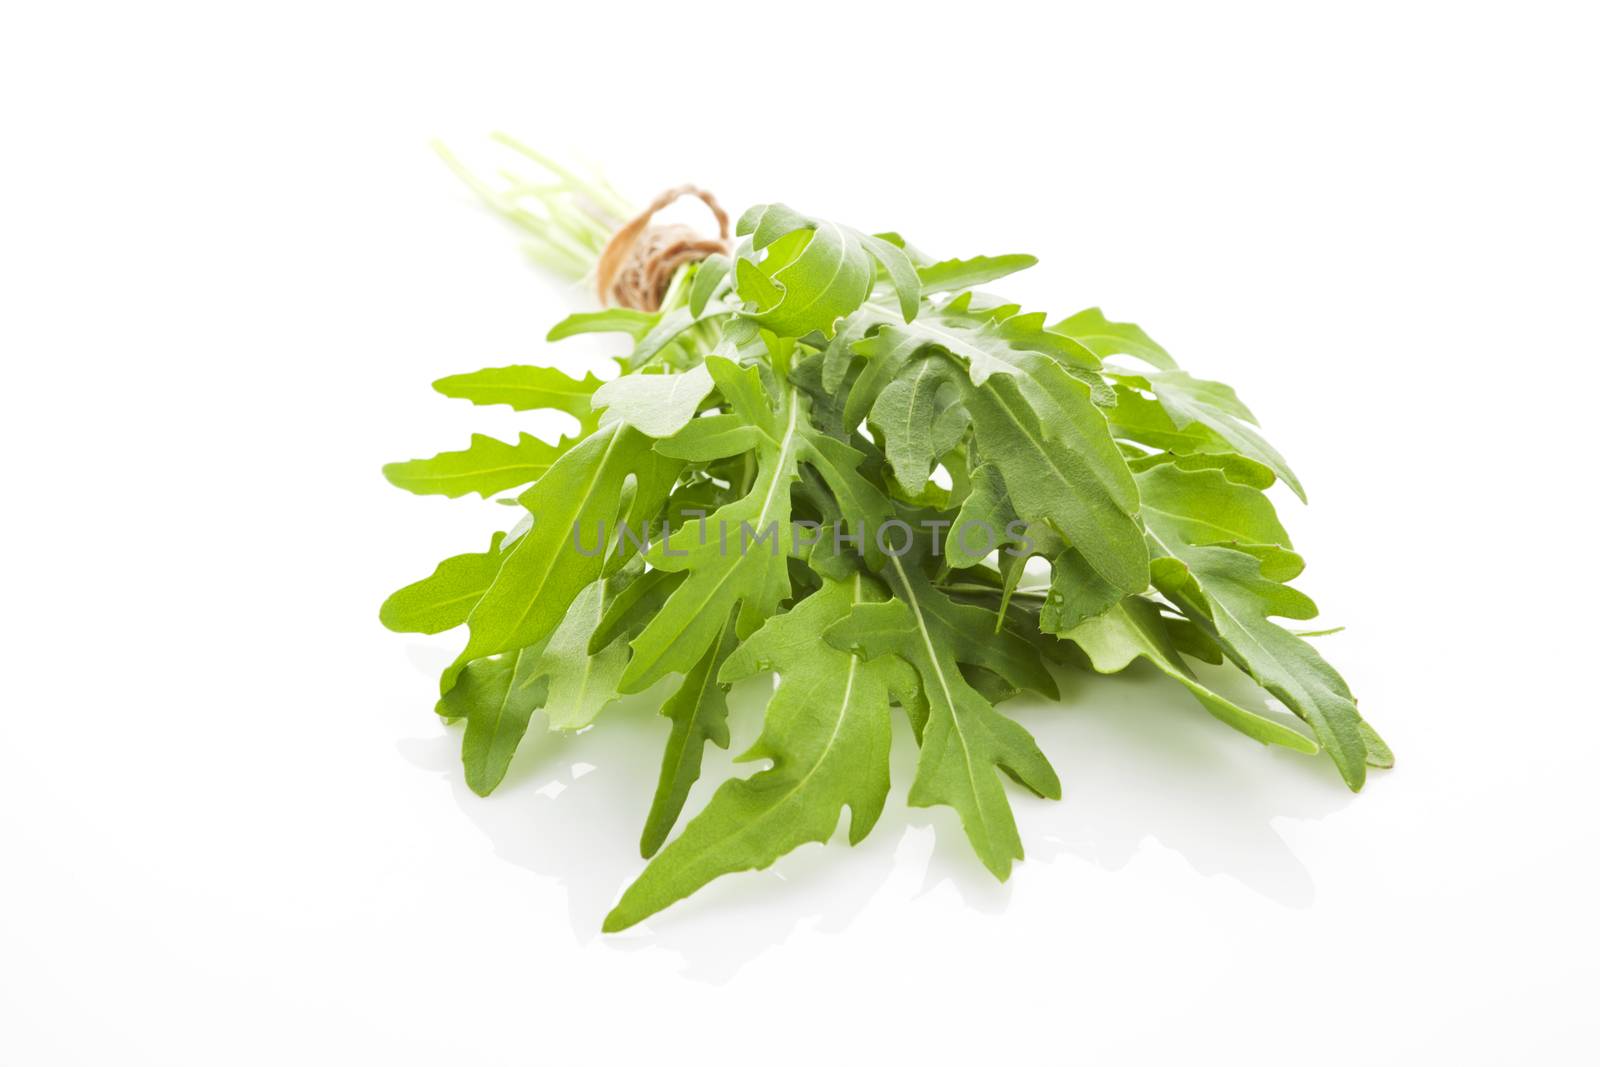 Fresh arugula leaves close up isolated on white background. Aromatic culinary herbs.